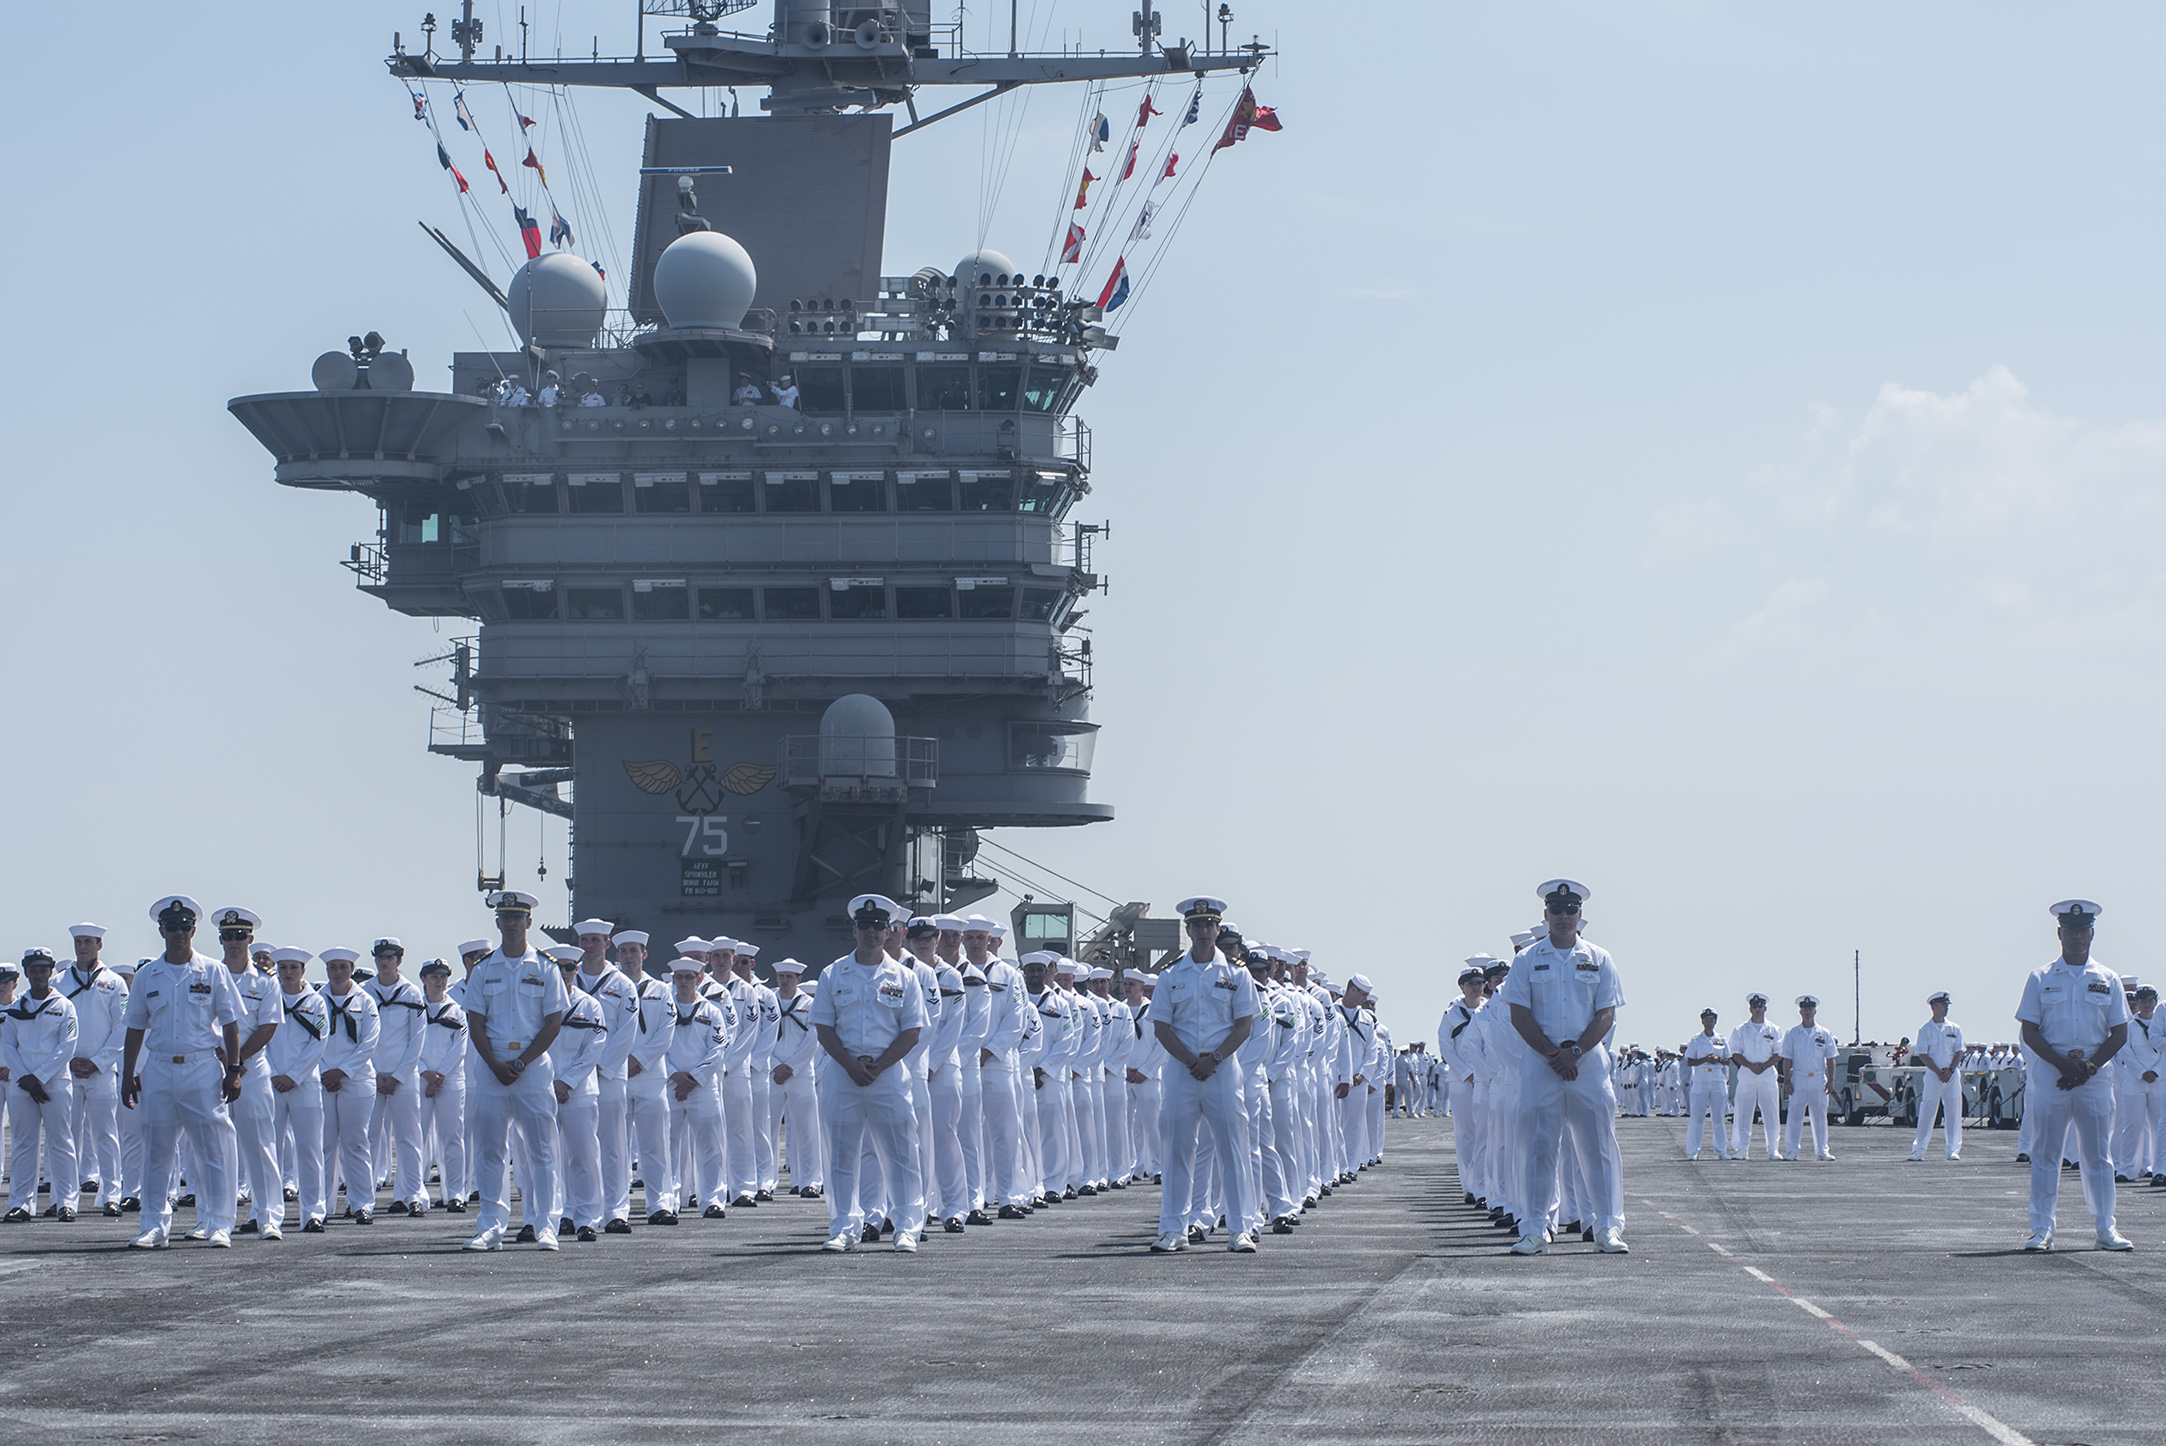 Uss Harry S Truman Cvn 75 Wallpapers Military Hq Uss Harry S Images, Photos, Reviews